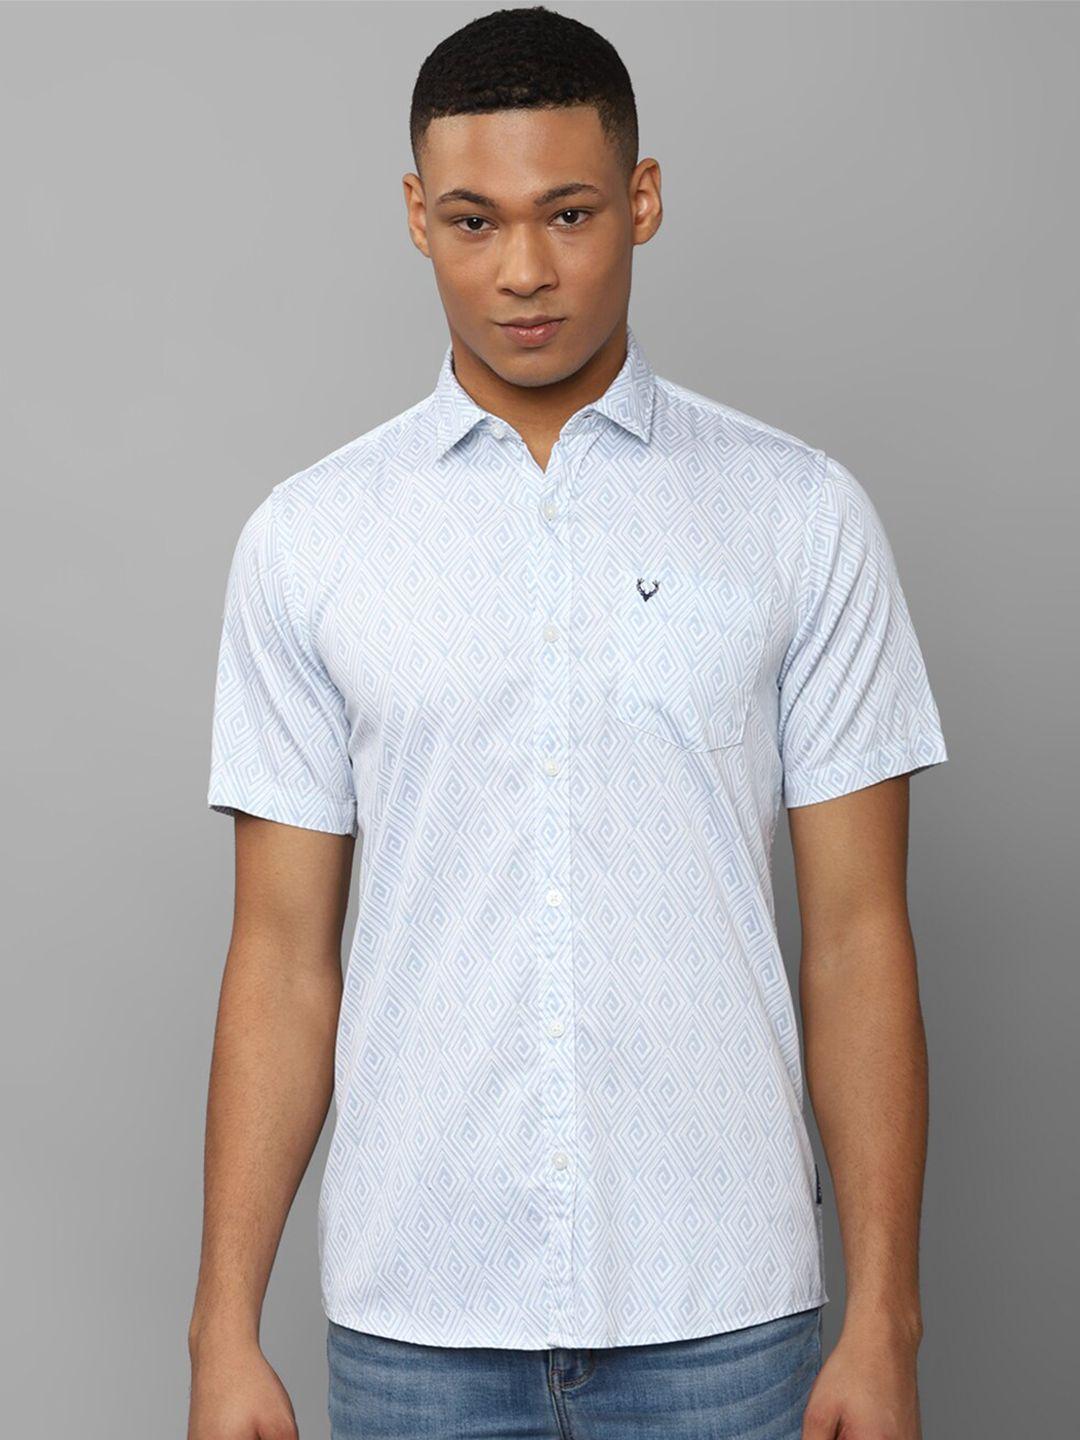 allen solly geometric printed pure cotton casual shirt